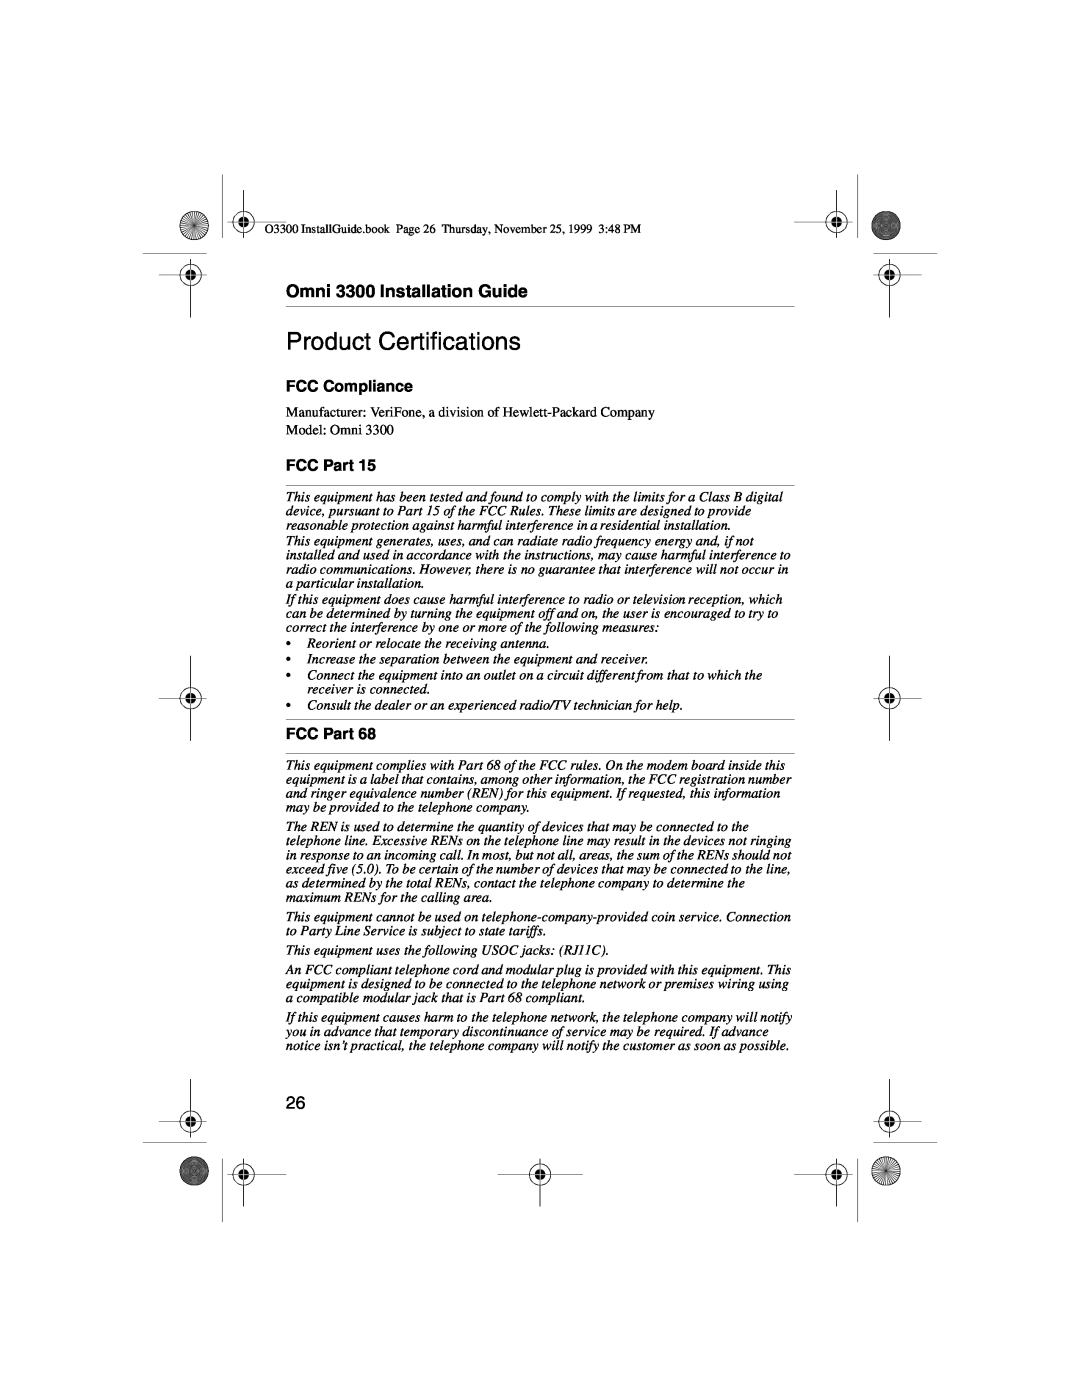 VeriFone manual Product Certifications, Omni 3300 Installation Guide, FCC Compliance, FCC Part 